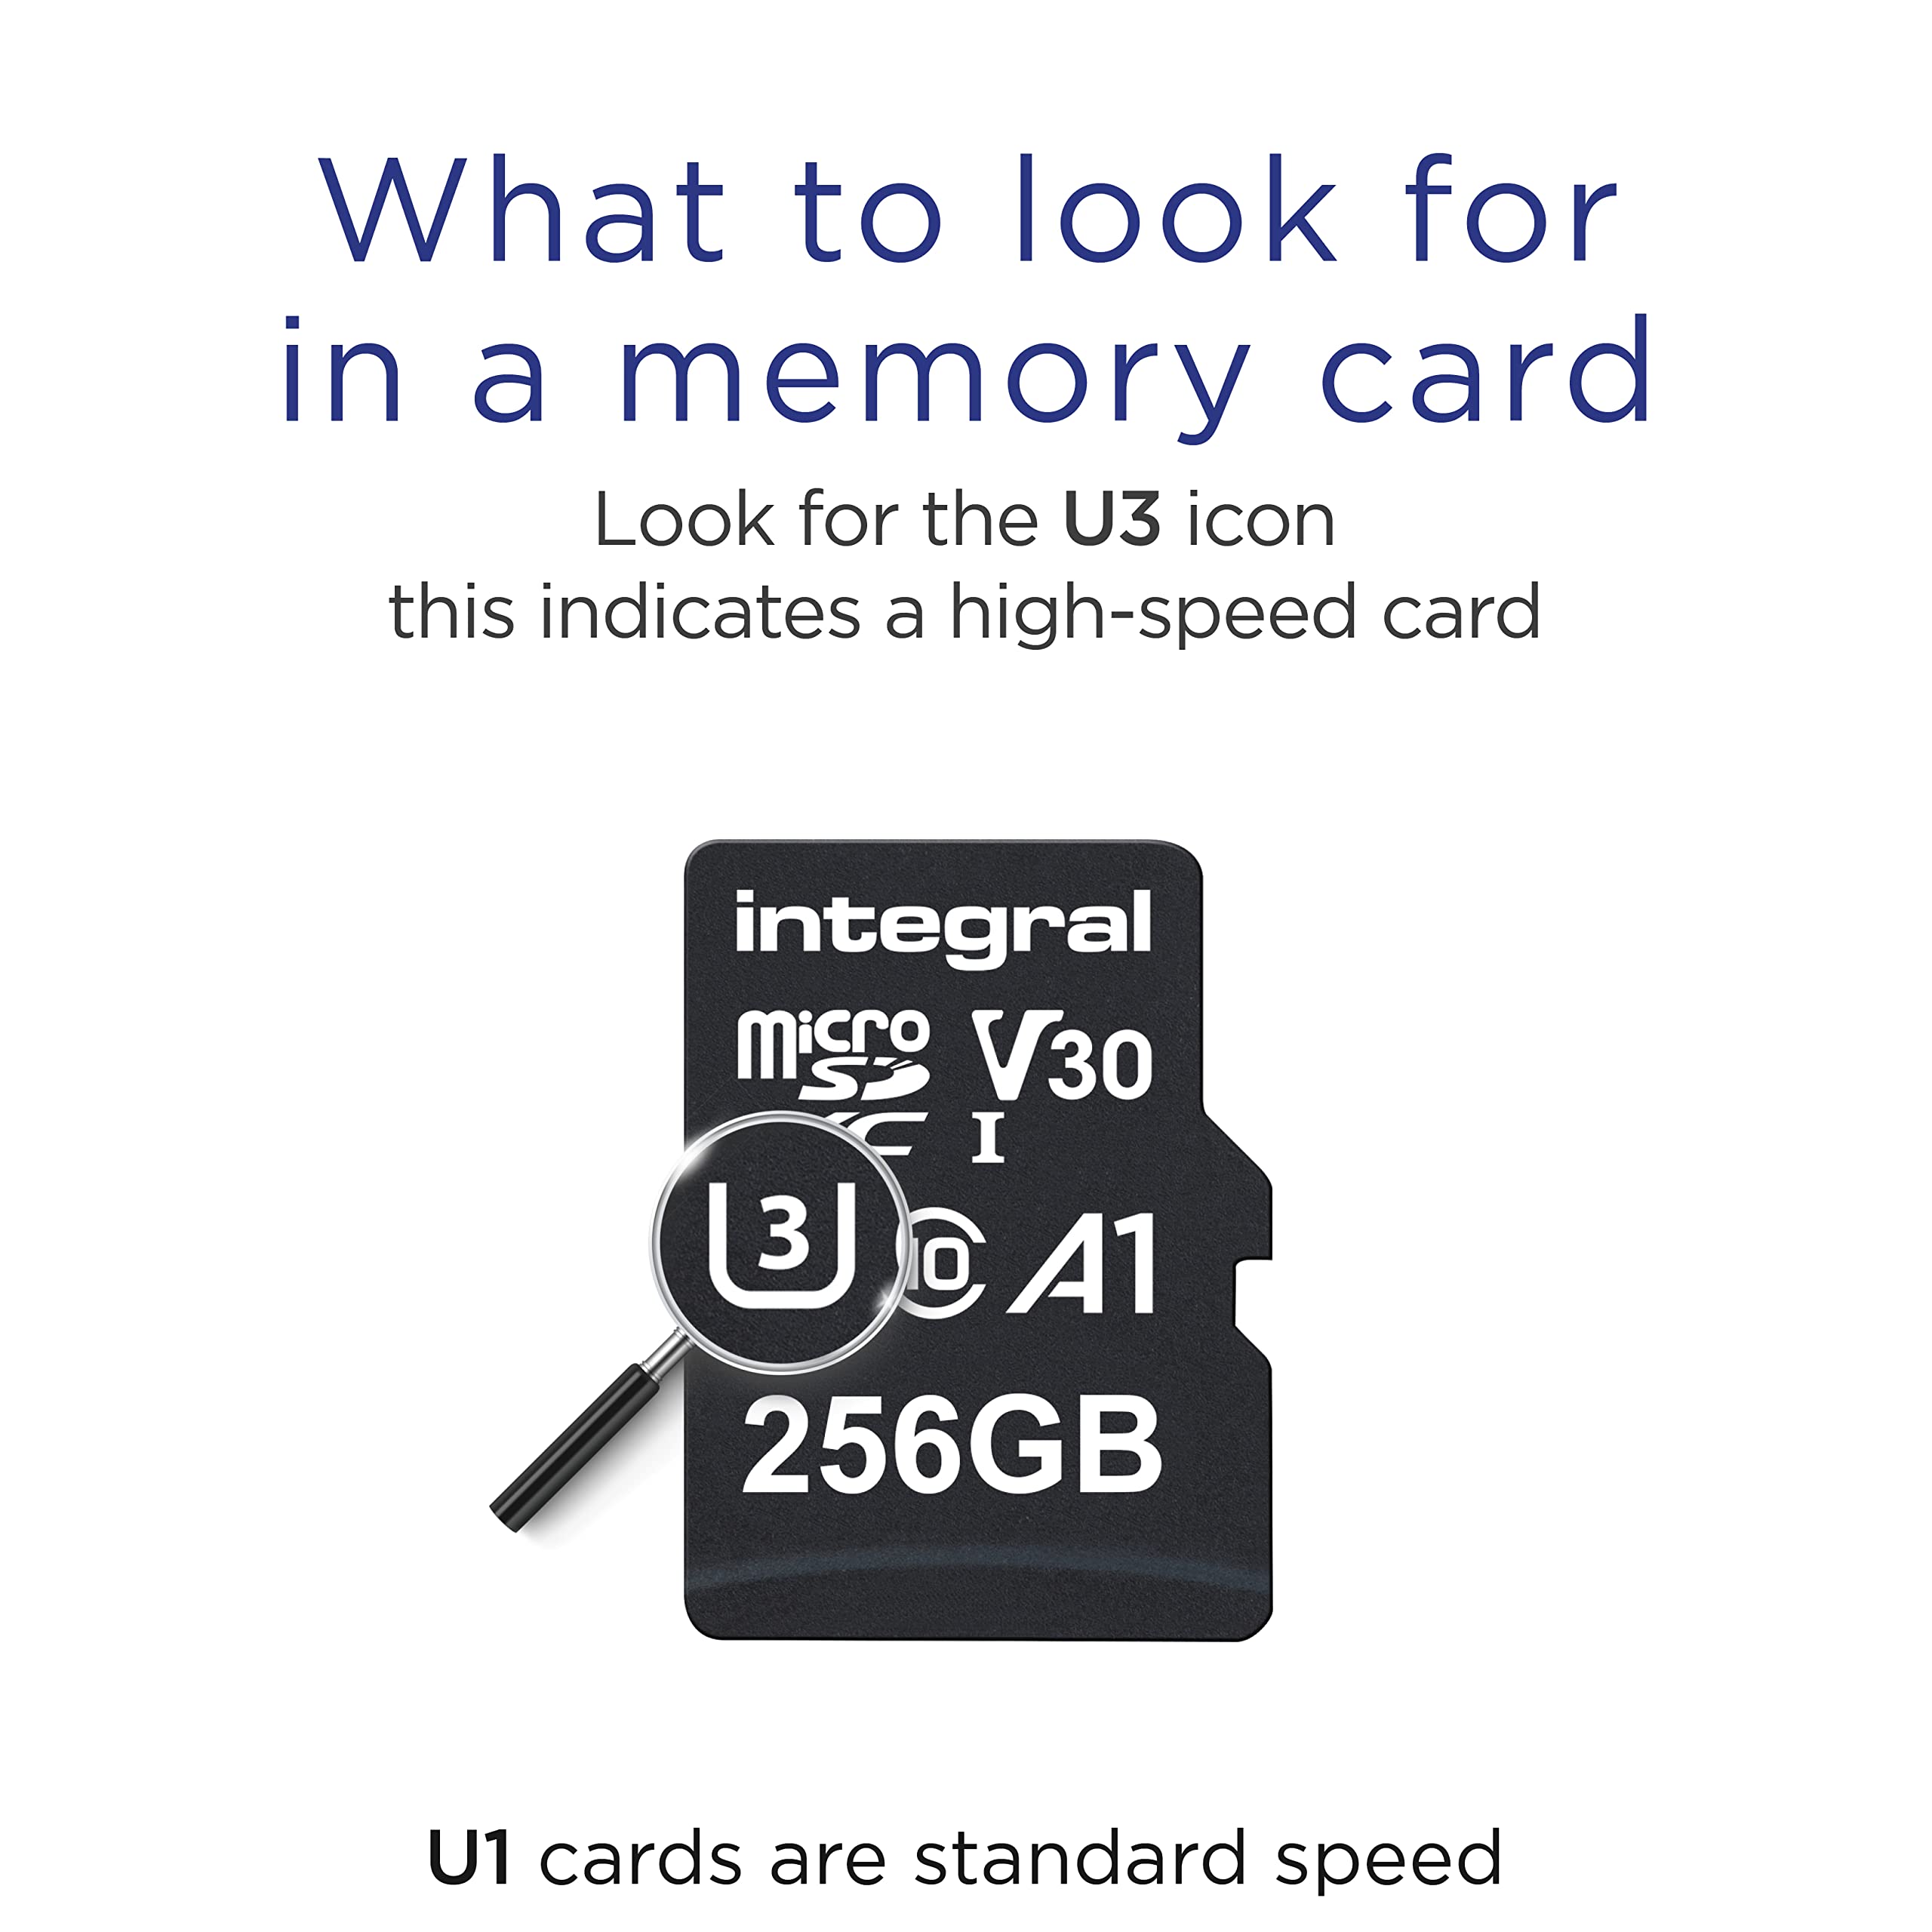 Integral 256GB Micro SD Card 4K Video Premium High Speed Memory Card SDXC Up to 100MB s Read Speed and 50MB s Write speed V30 C10 U3 UHS-I A1